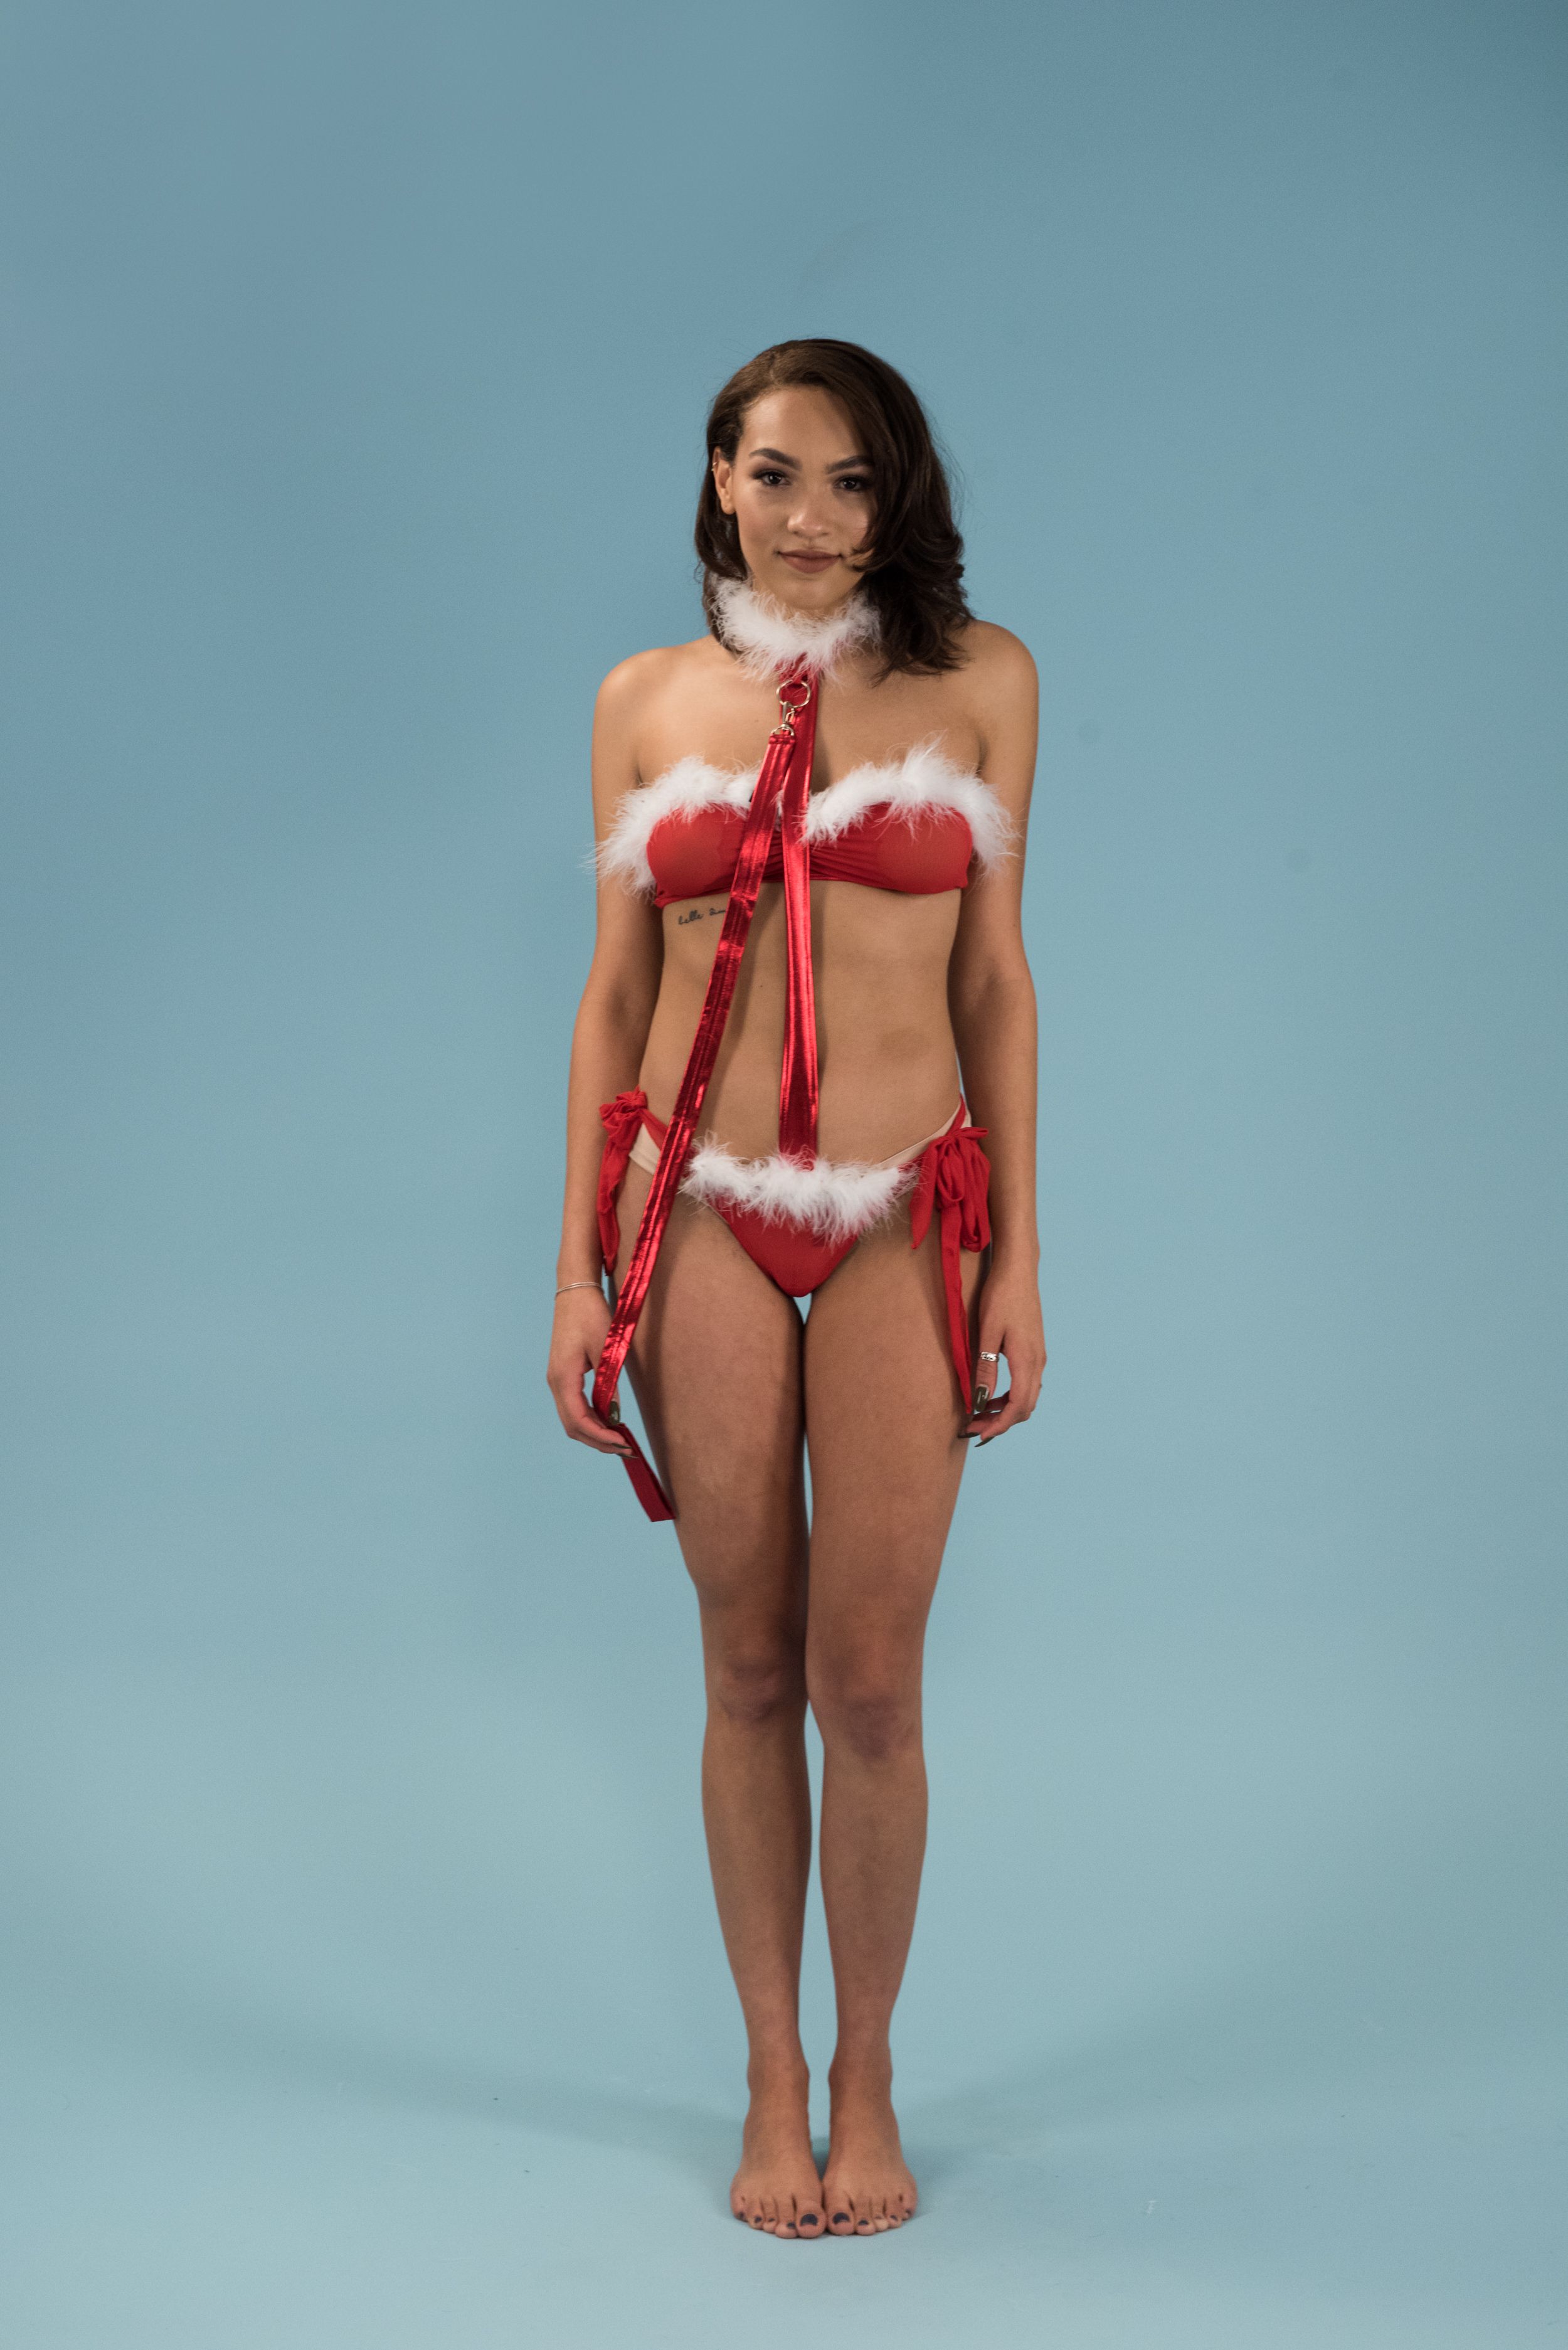 Real Women Try on Holiday-Themed Lingerie, and Their Reactions Are